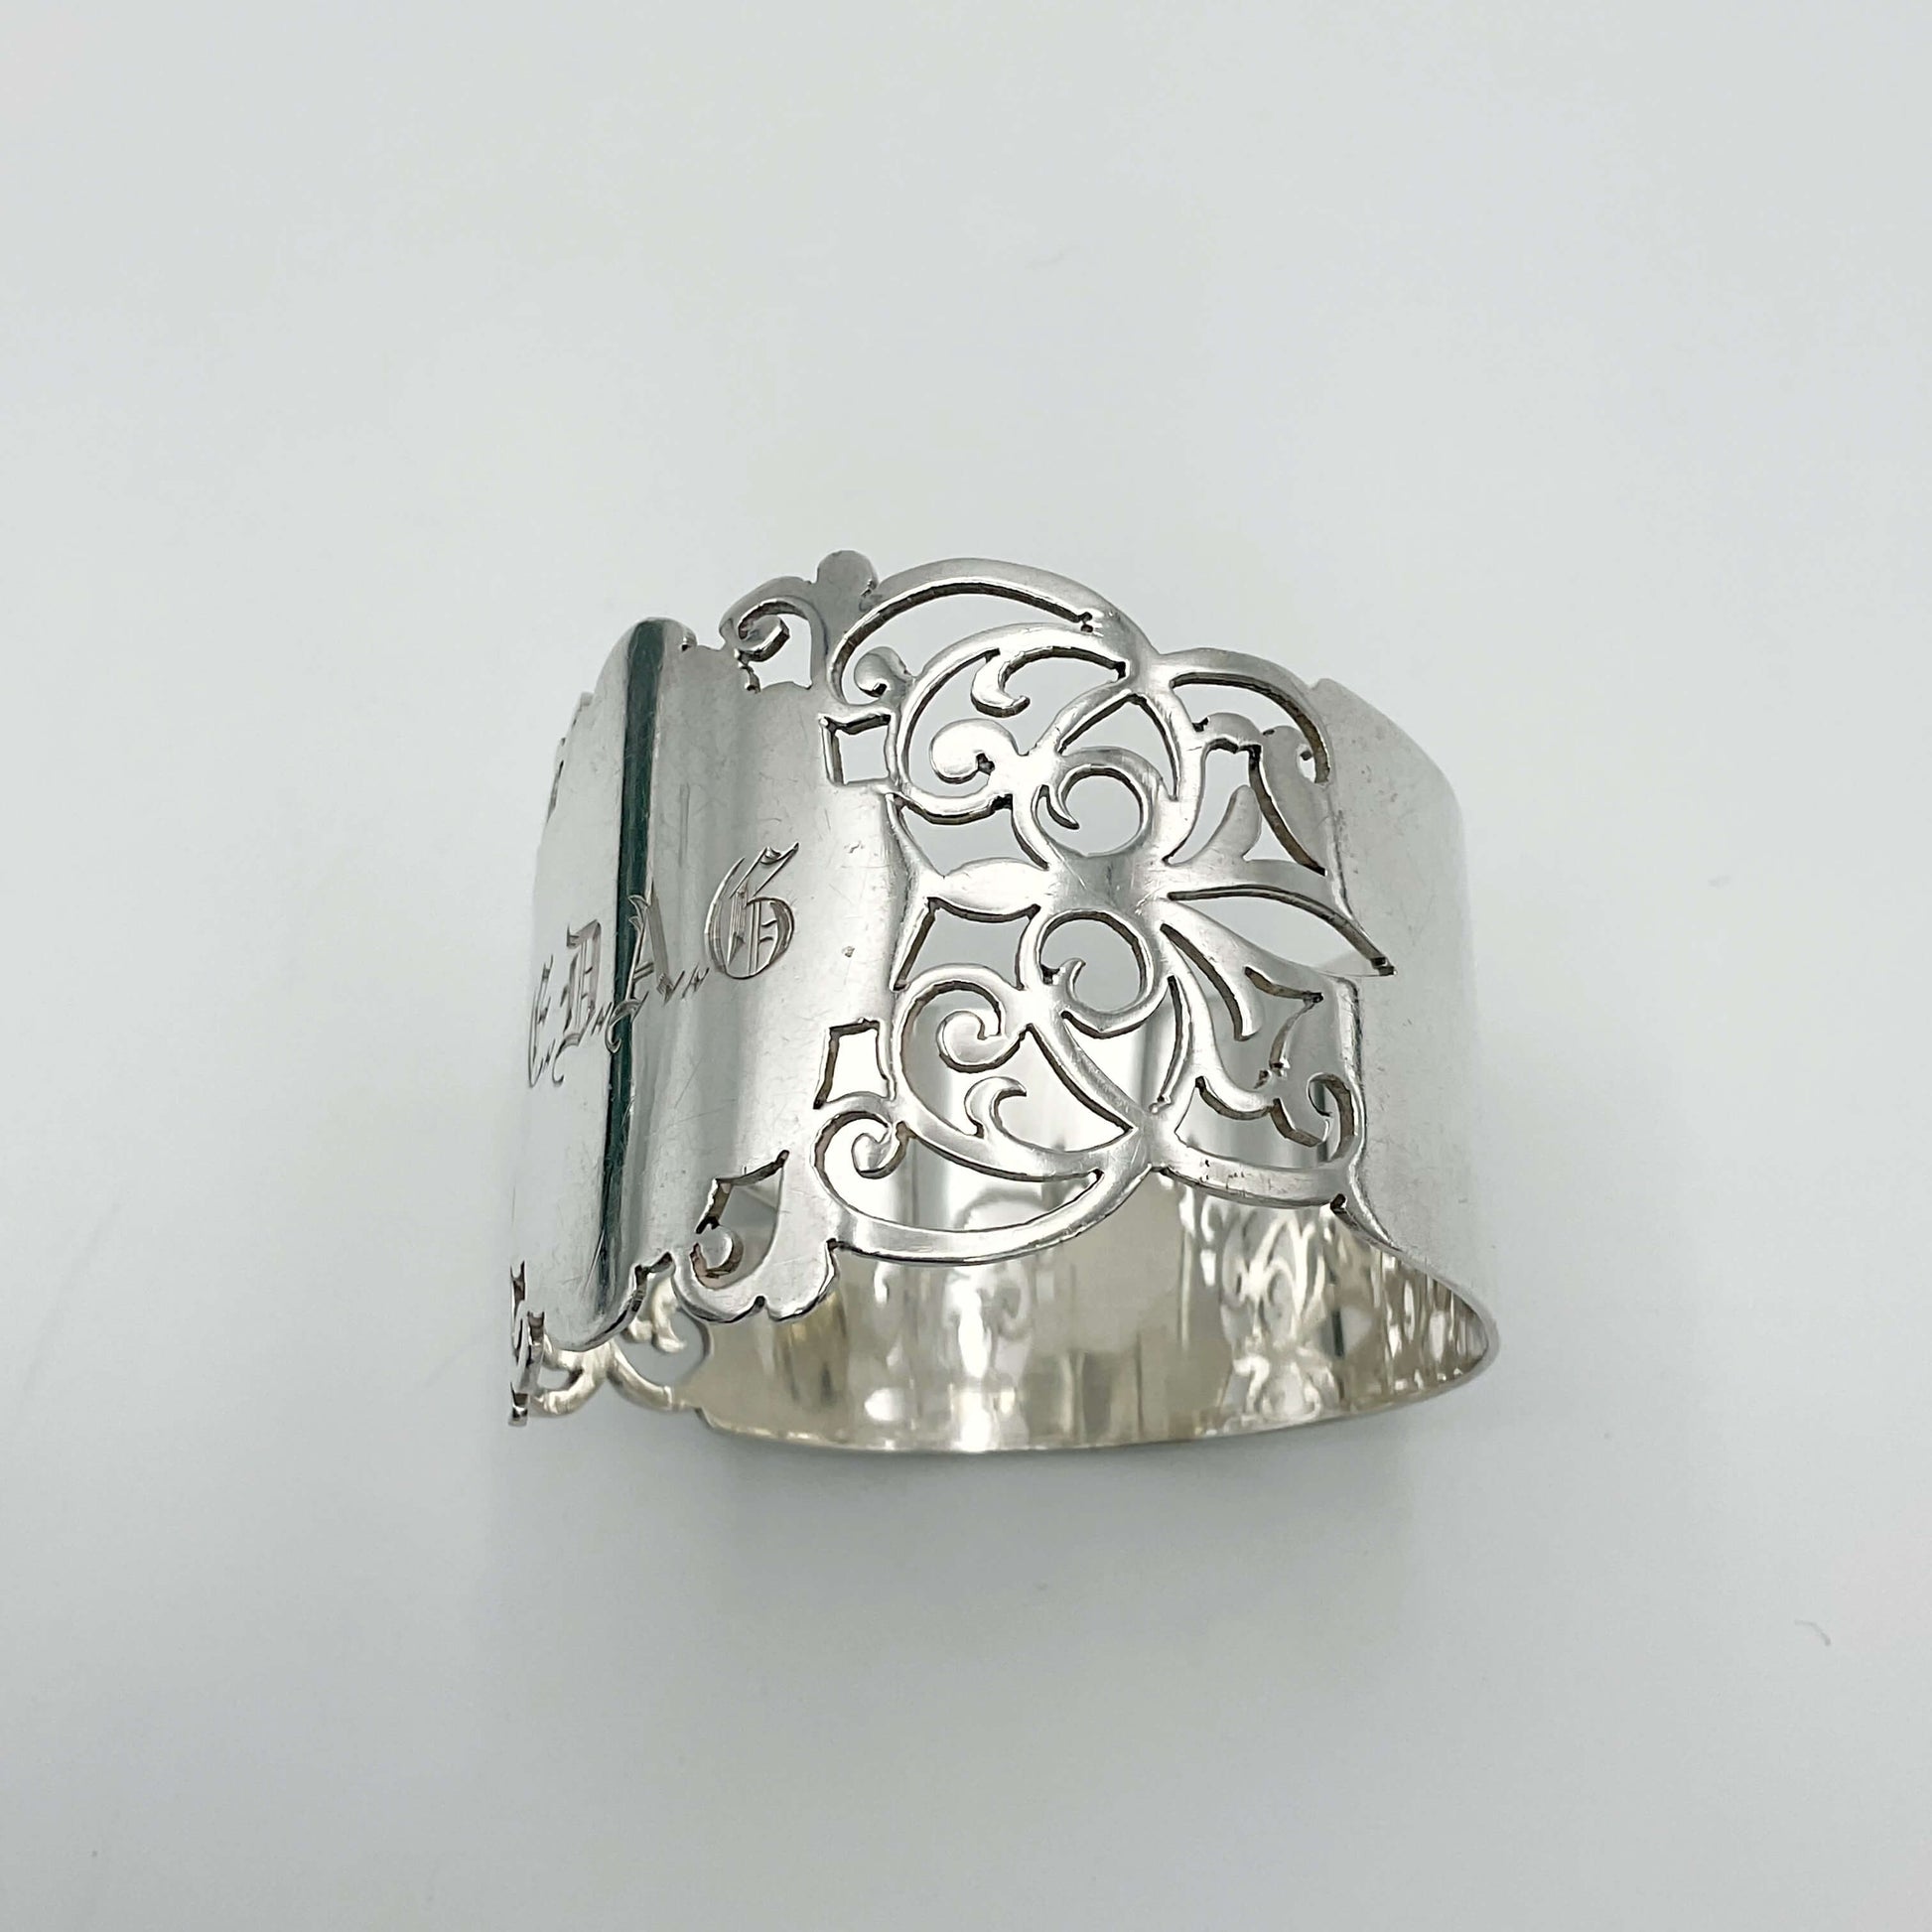 Shiny napkin ring with elaborate sides and EDAG in the centre on a plain background 